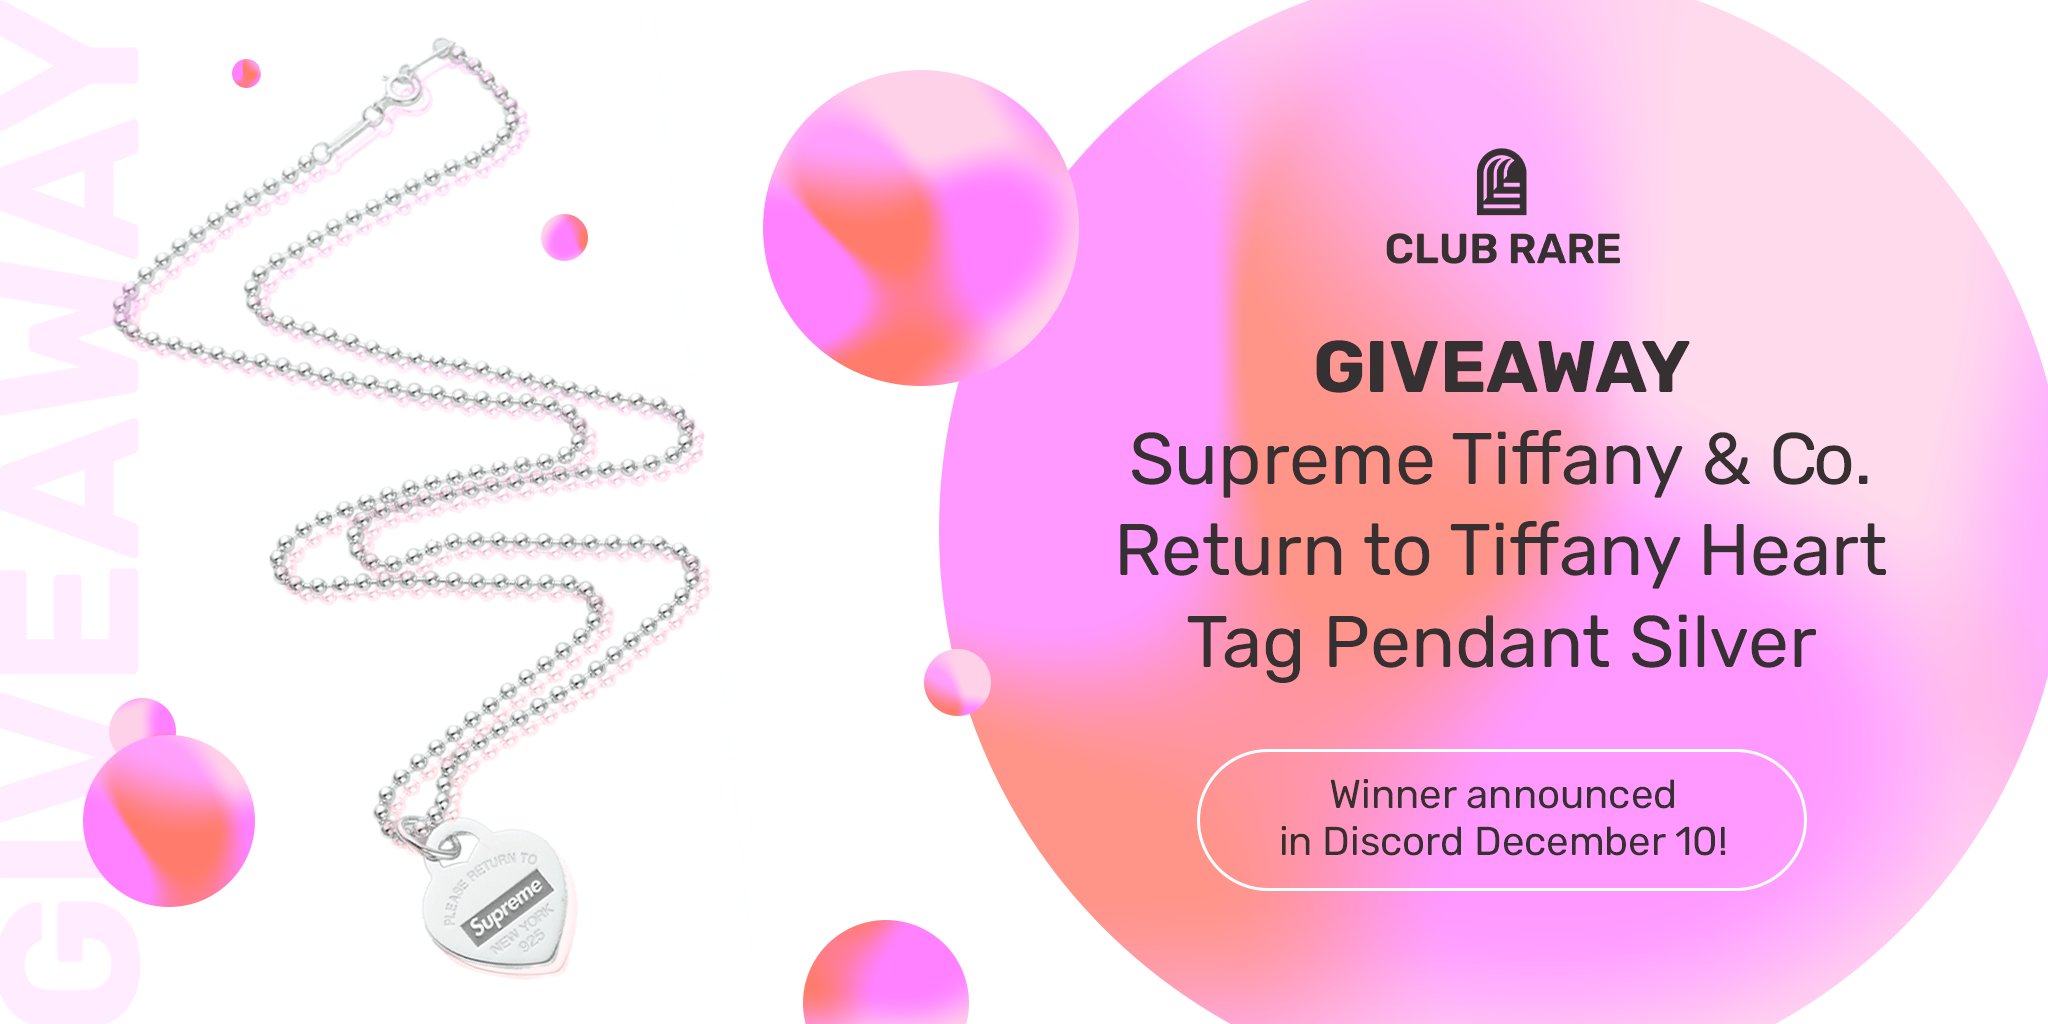 ClubRare on Twitter: "ClubRare's Tiffany x Supreme 'Return to